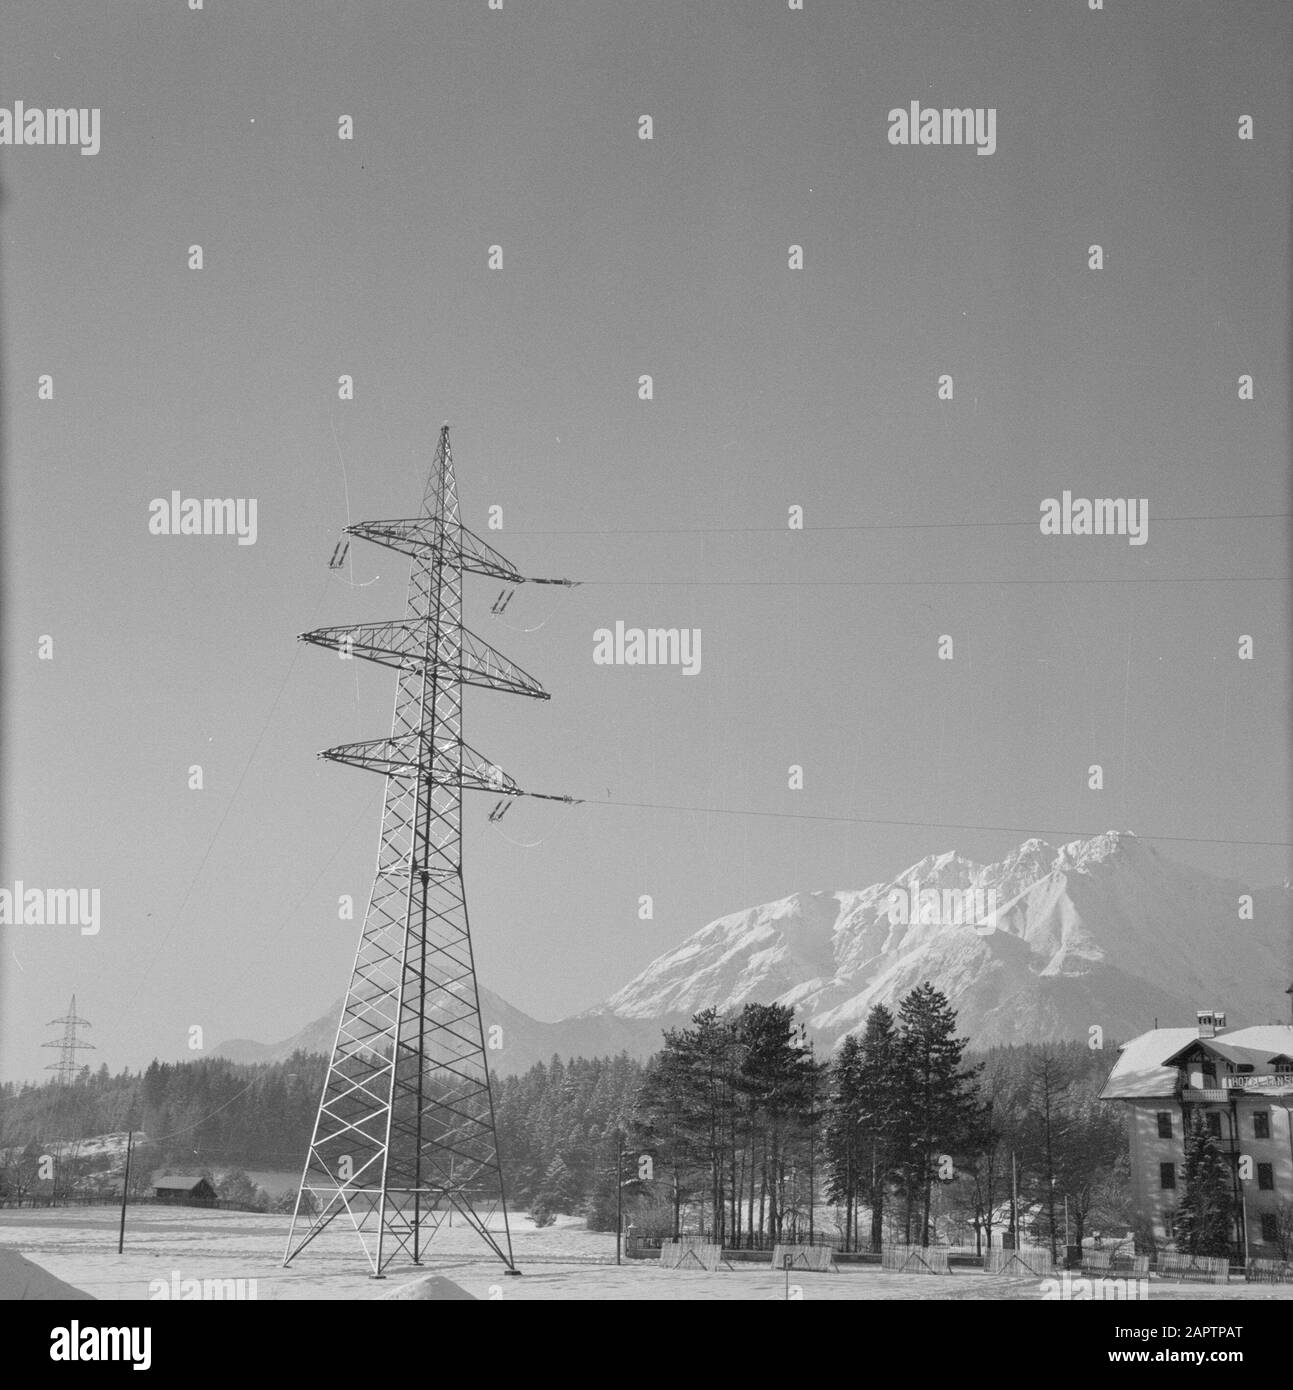 Winter in Tyrol  High voltage mast with the Karwendel Mountains in the background Date: January 1960 Location: Austria, Sistrans, Tyrol Keywords: mountains, electricity, high voltage masts, landscapes, snow, winter Stock Photo